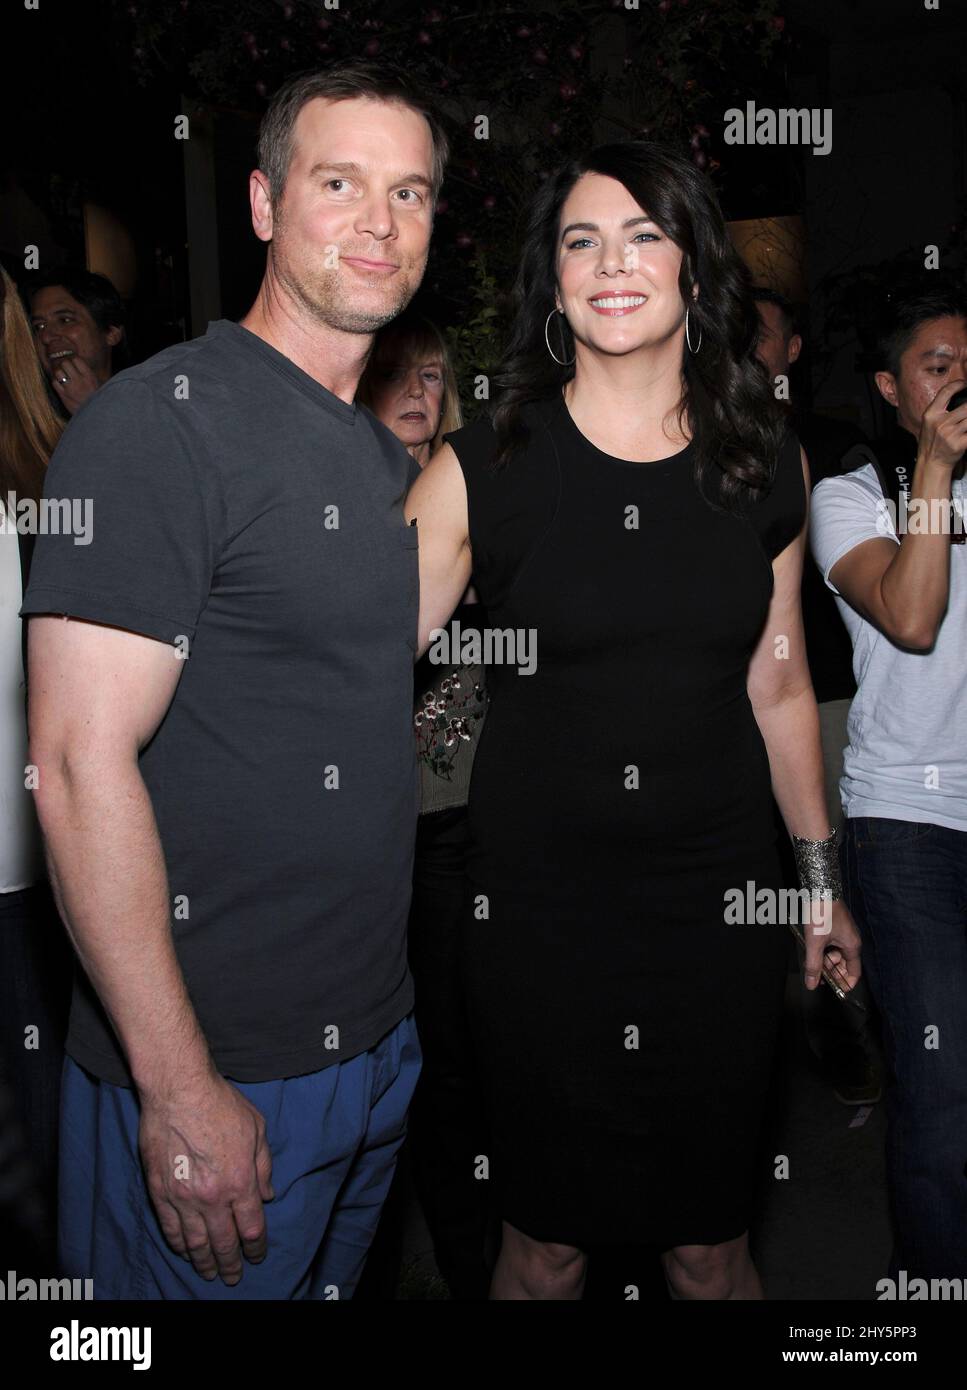 Peter Krause & Lauren Graham, attending the 100th Episode of Parenthood at Universal Studios in Hollywood, California. Stock Photo